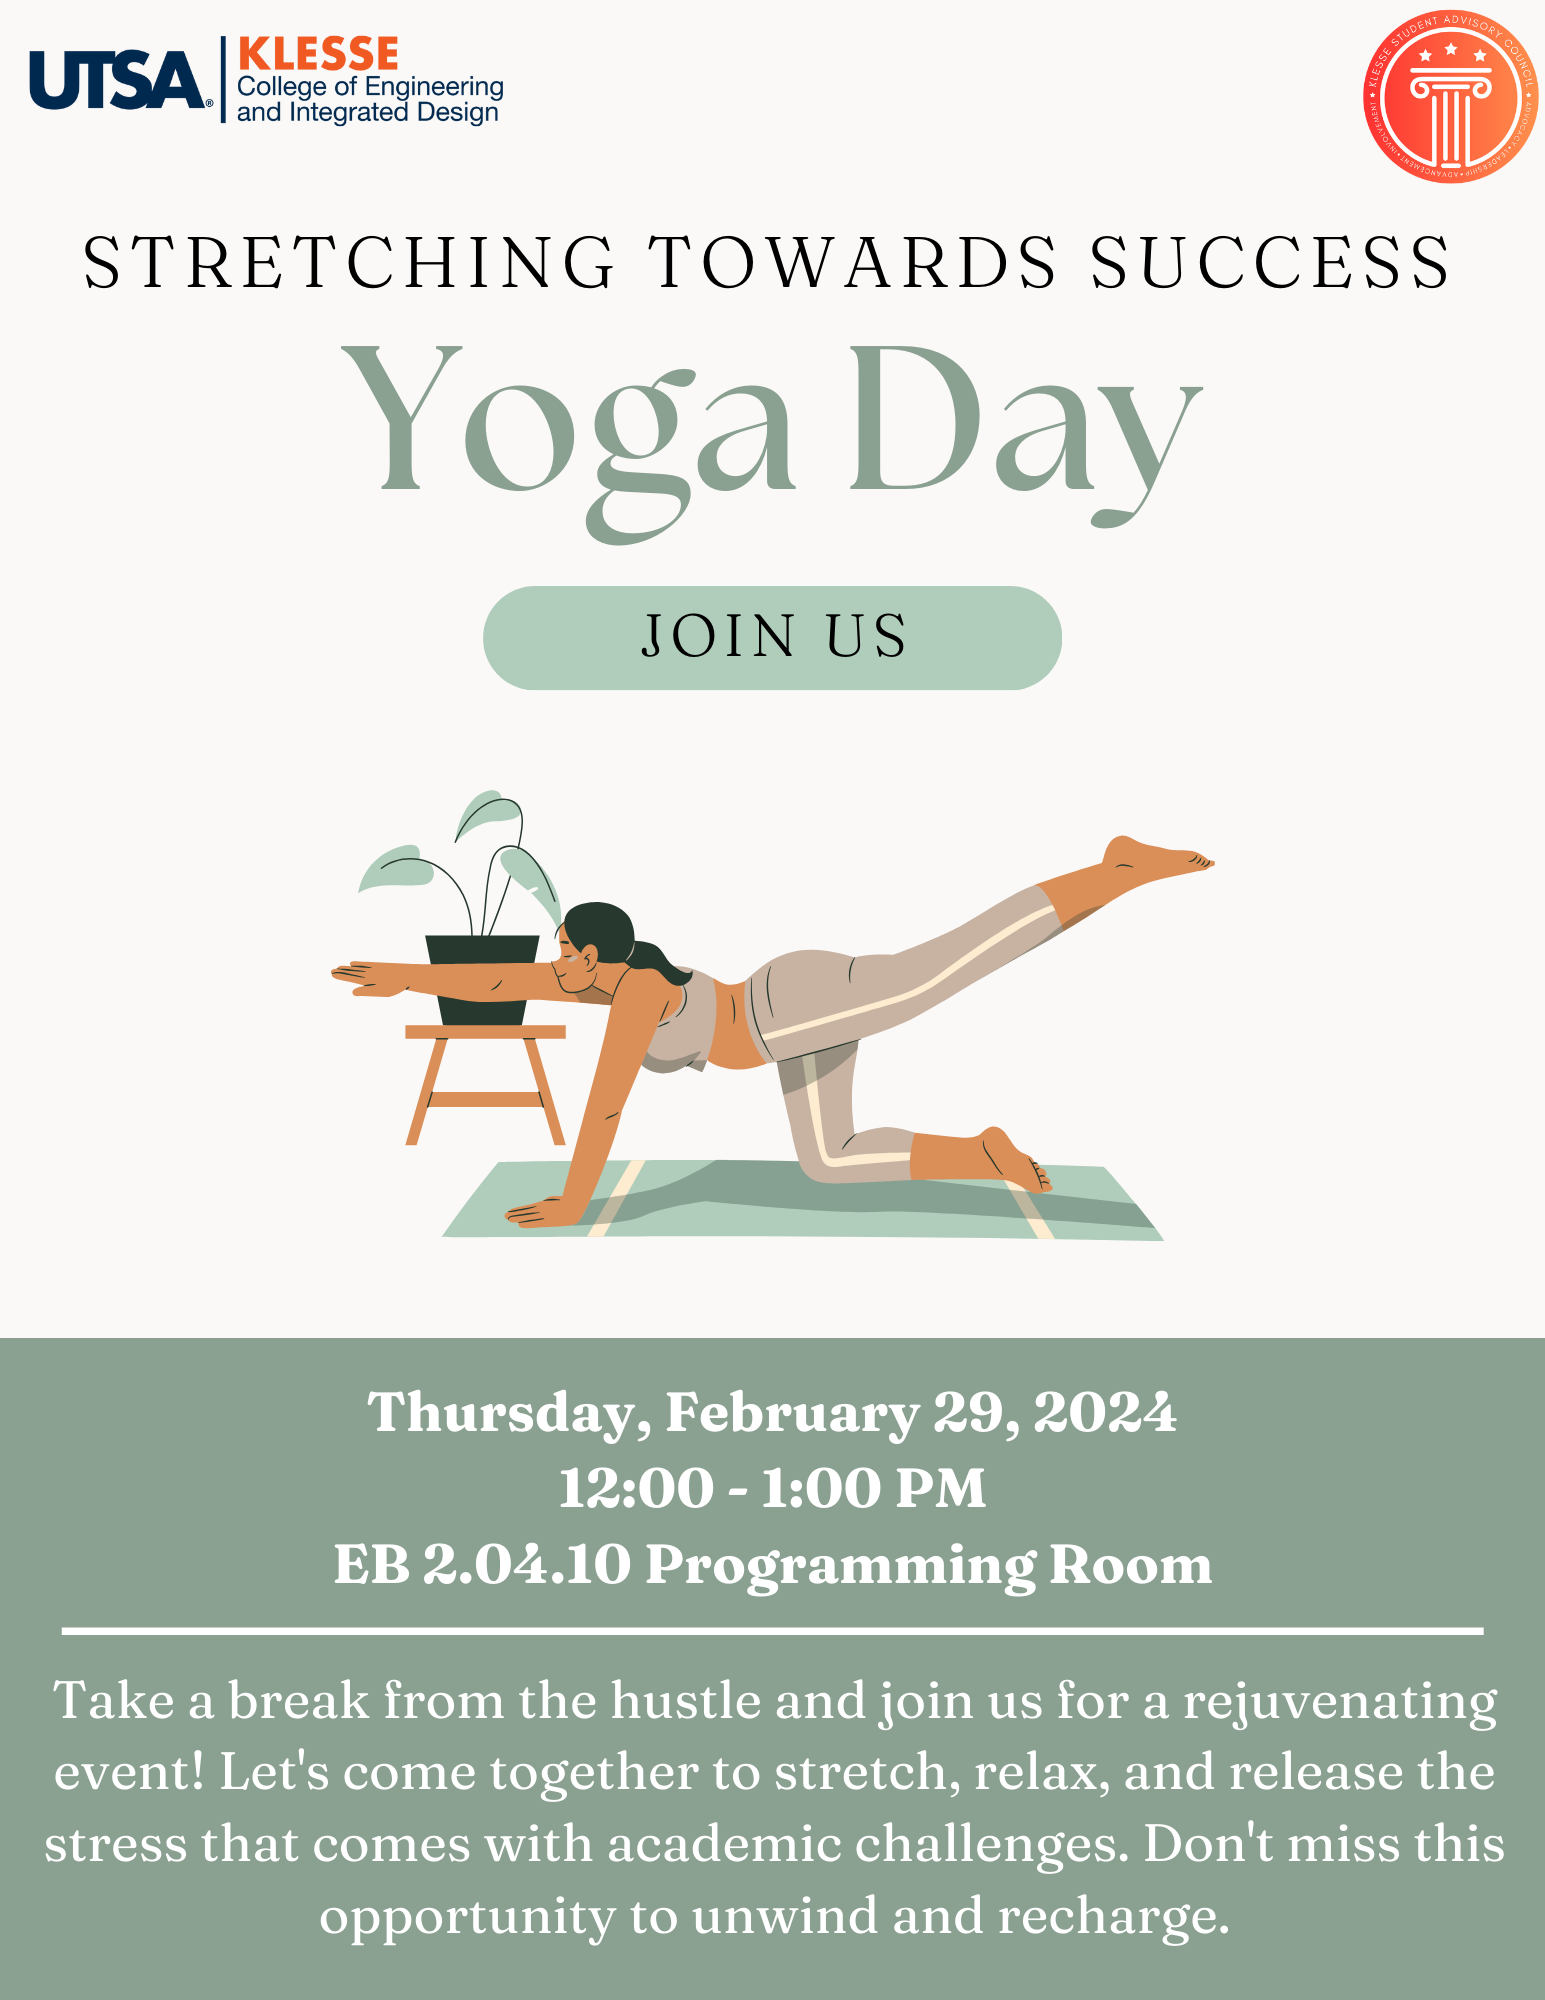 Stretching Towards Success: Yoga Day